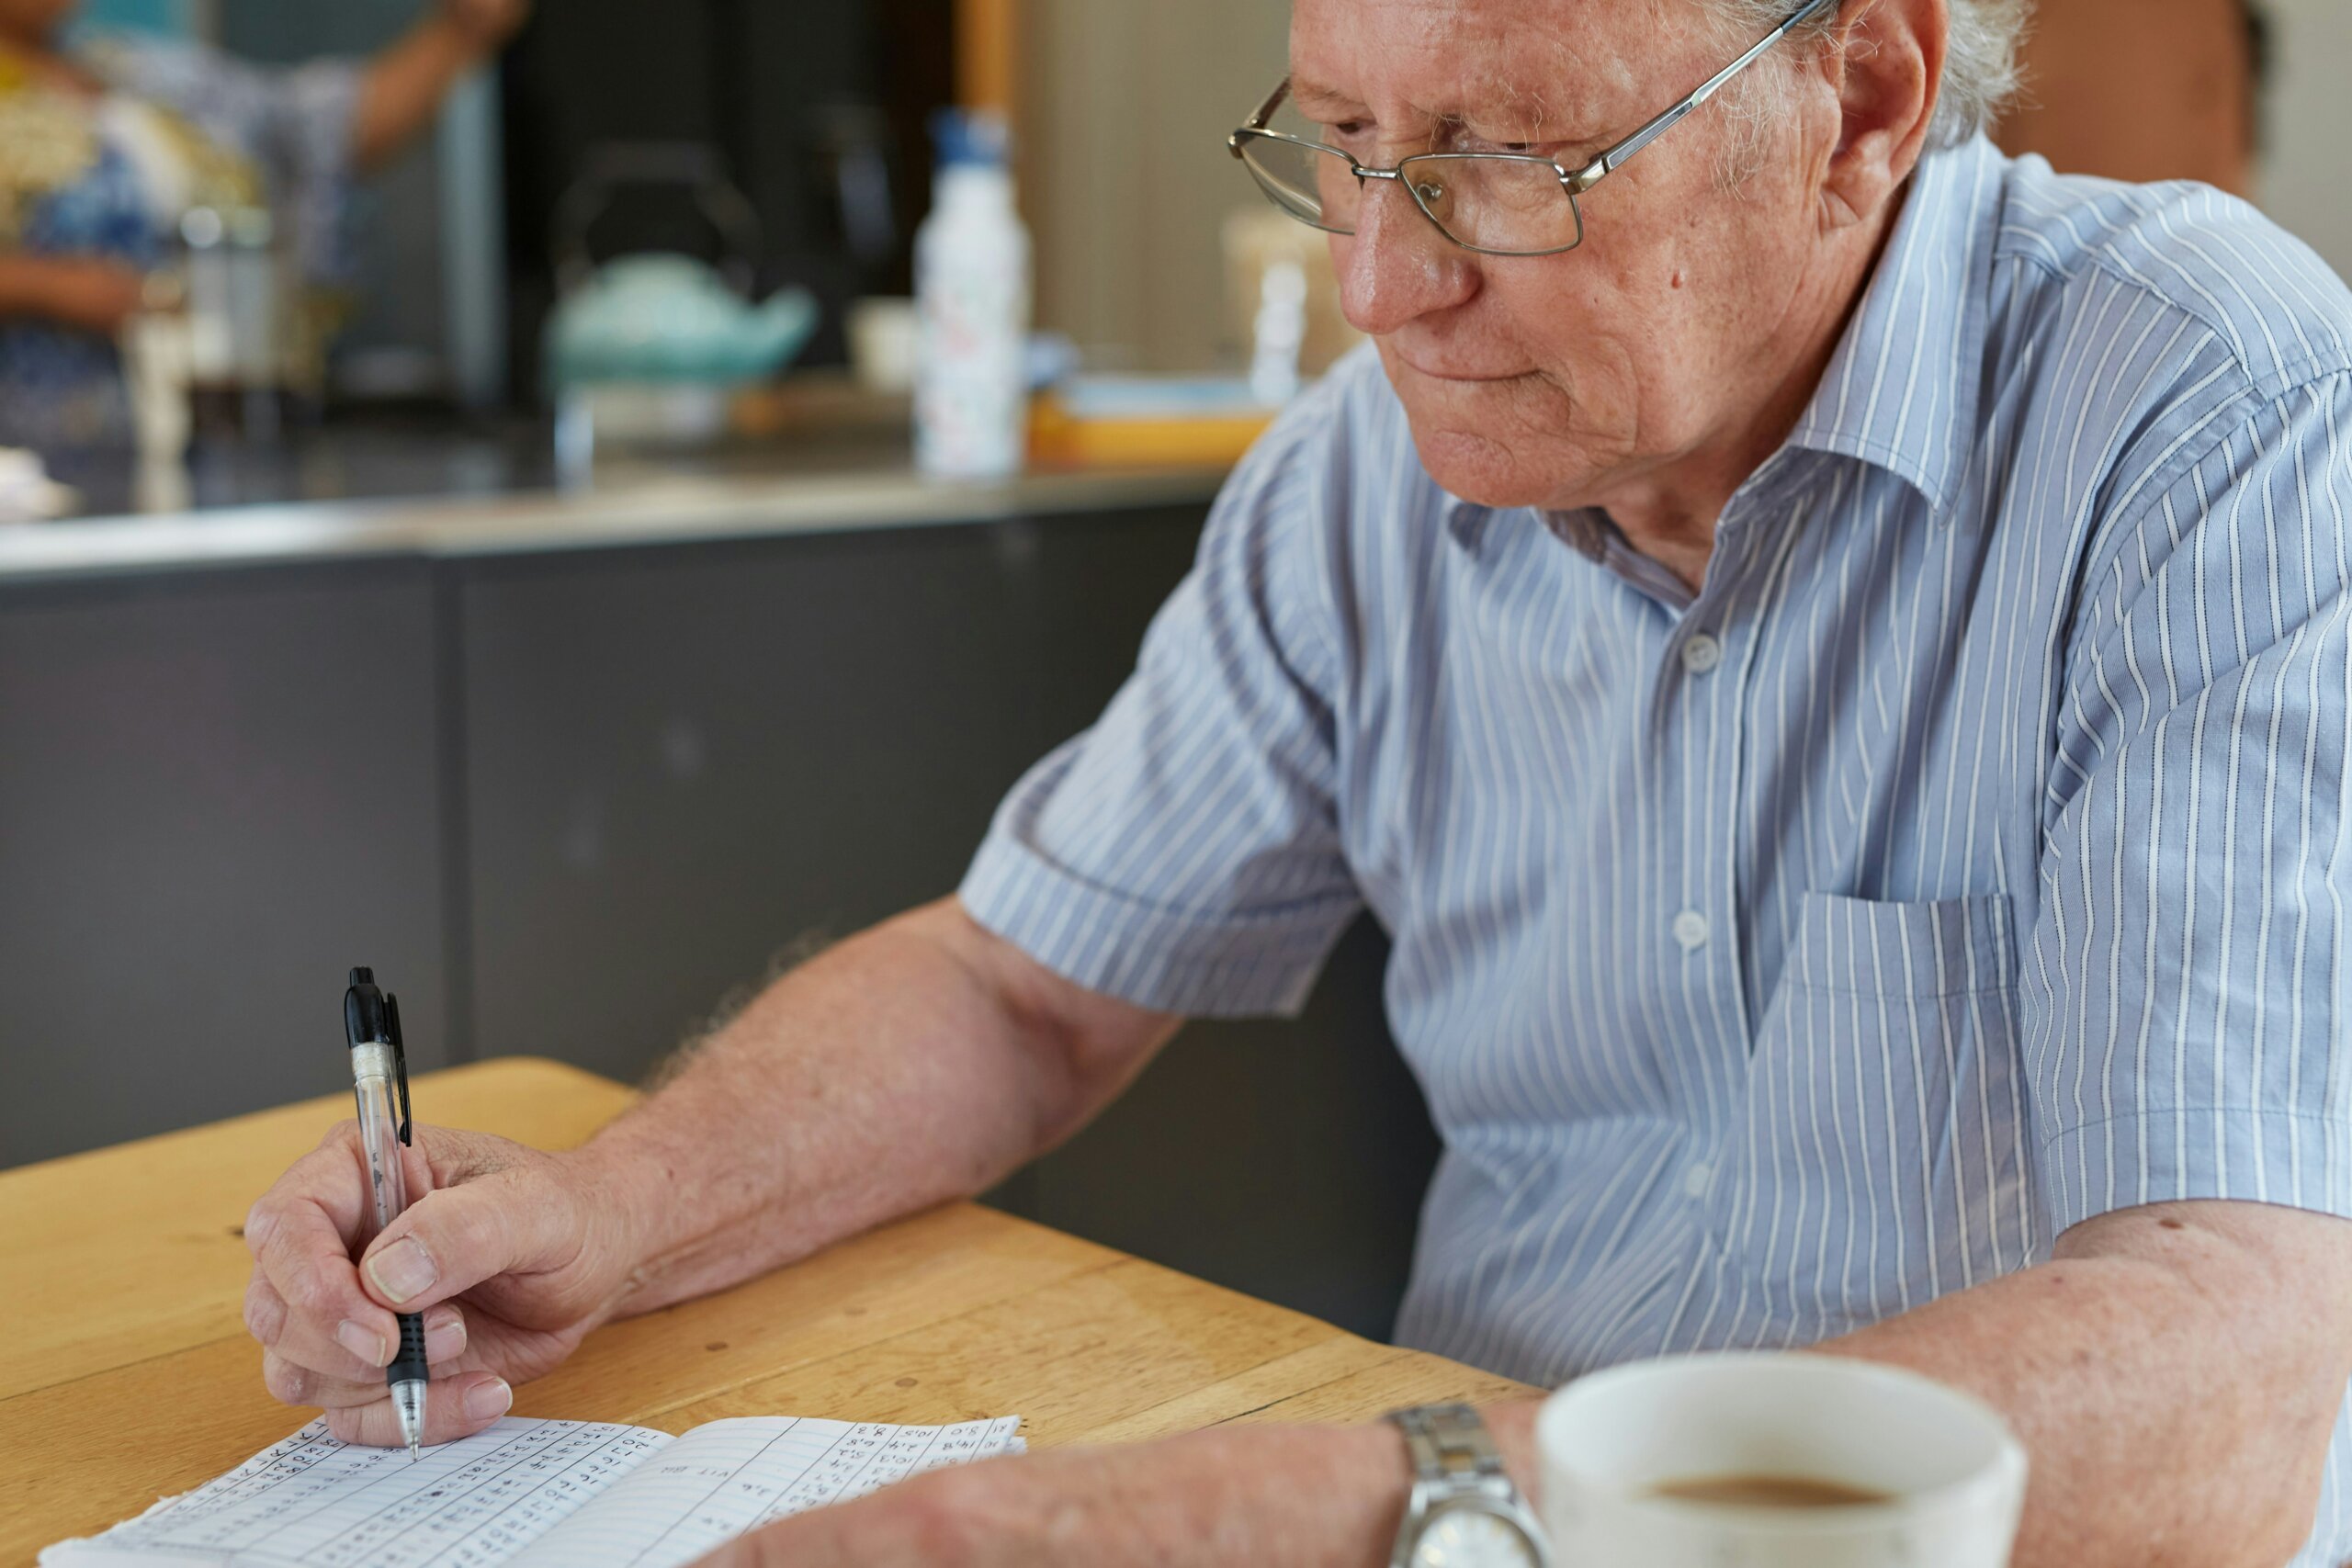 A man sitting at a table writing diabetes data in a notebook